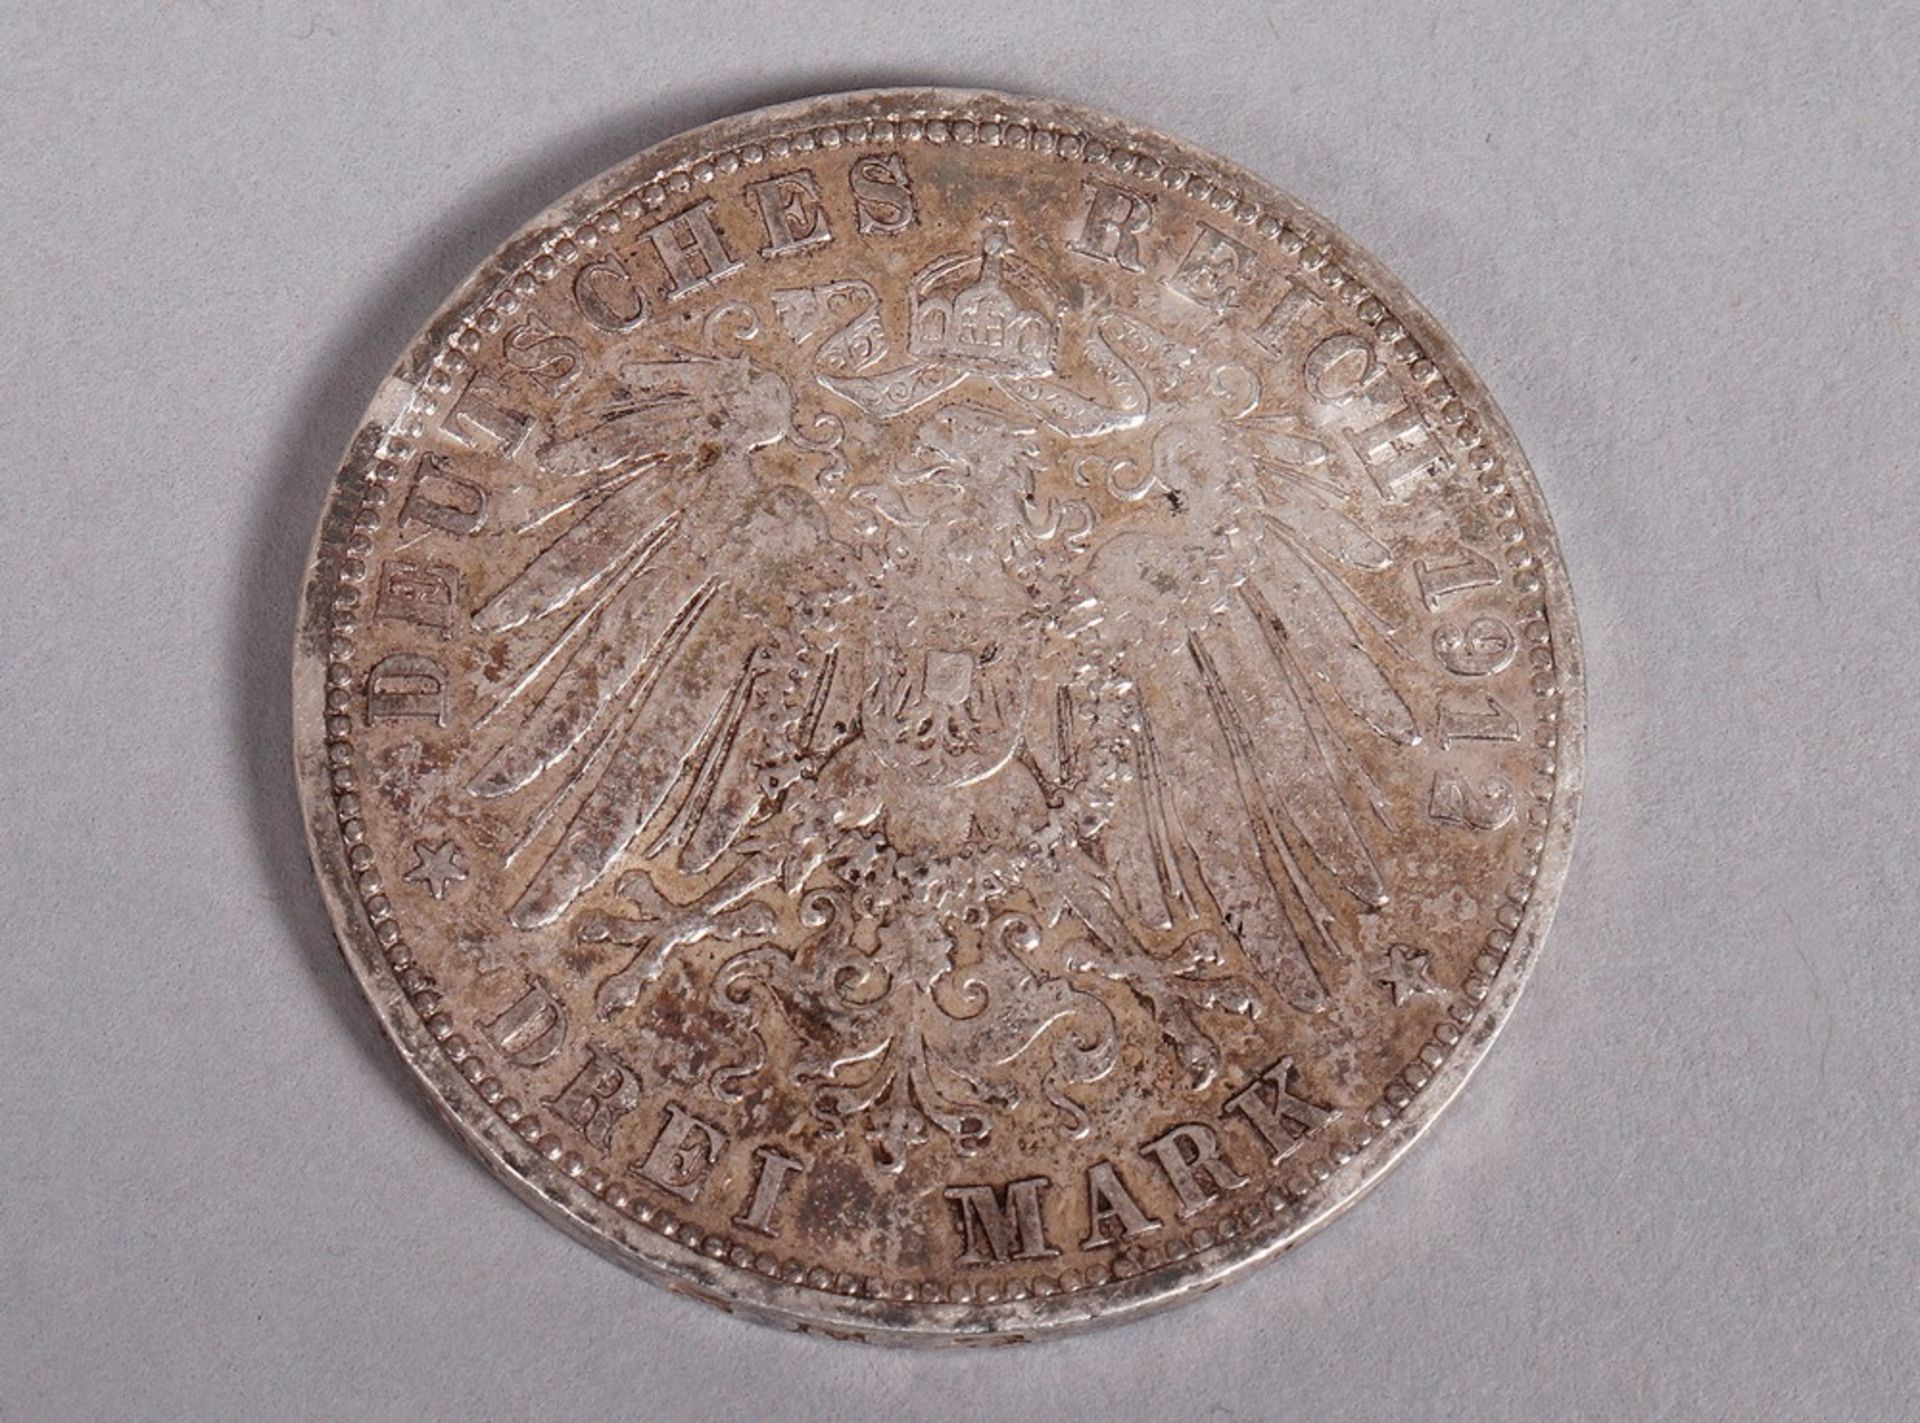 Prussia, 3 marks, 1912 A, SS-VZ, silver - Image 2 of 2